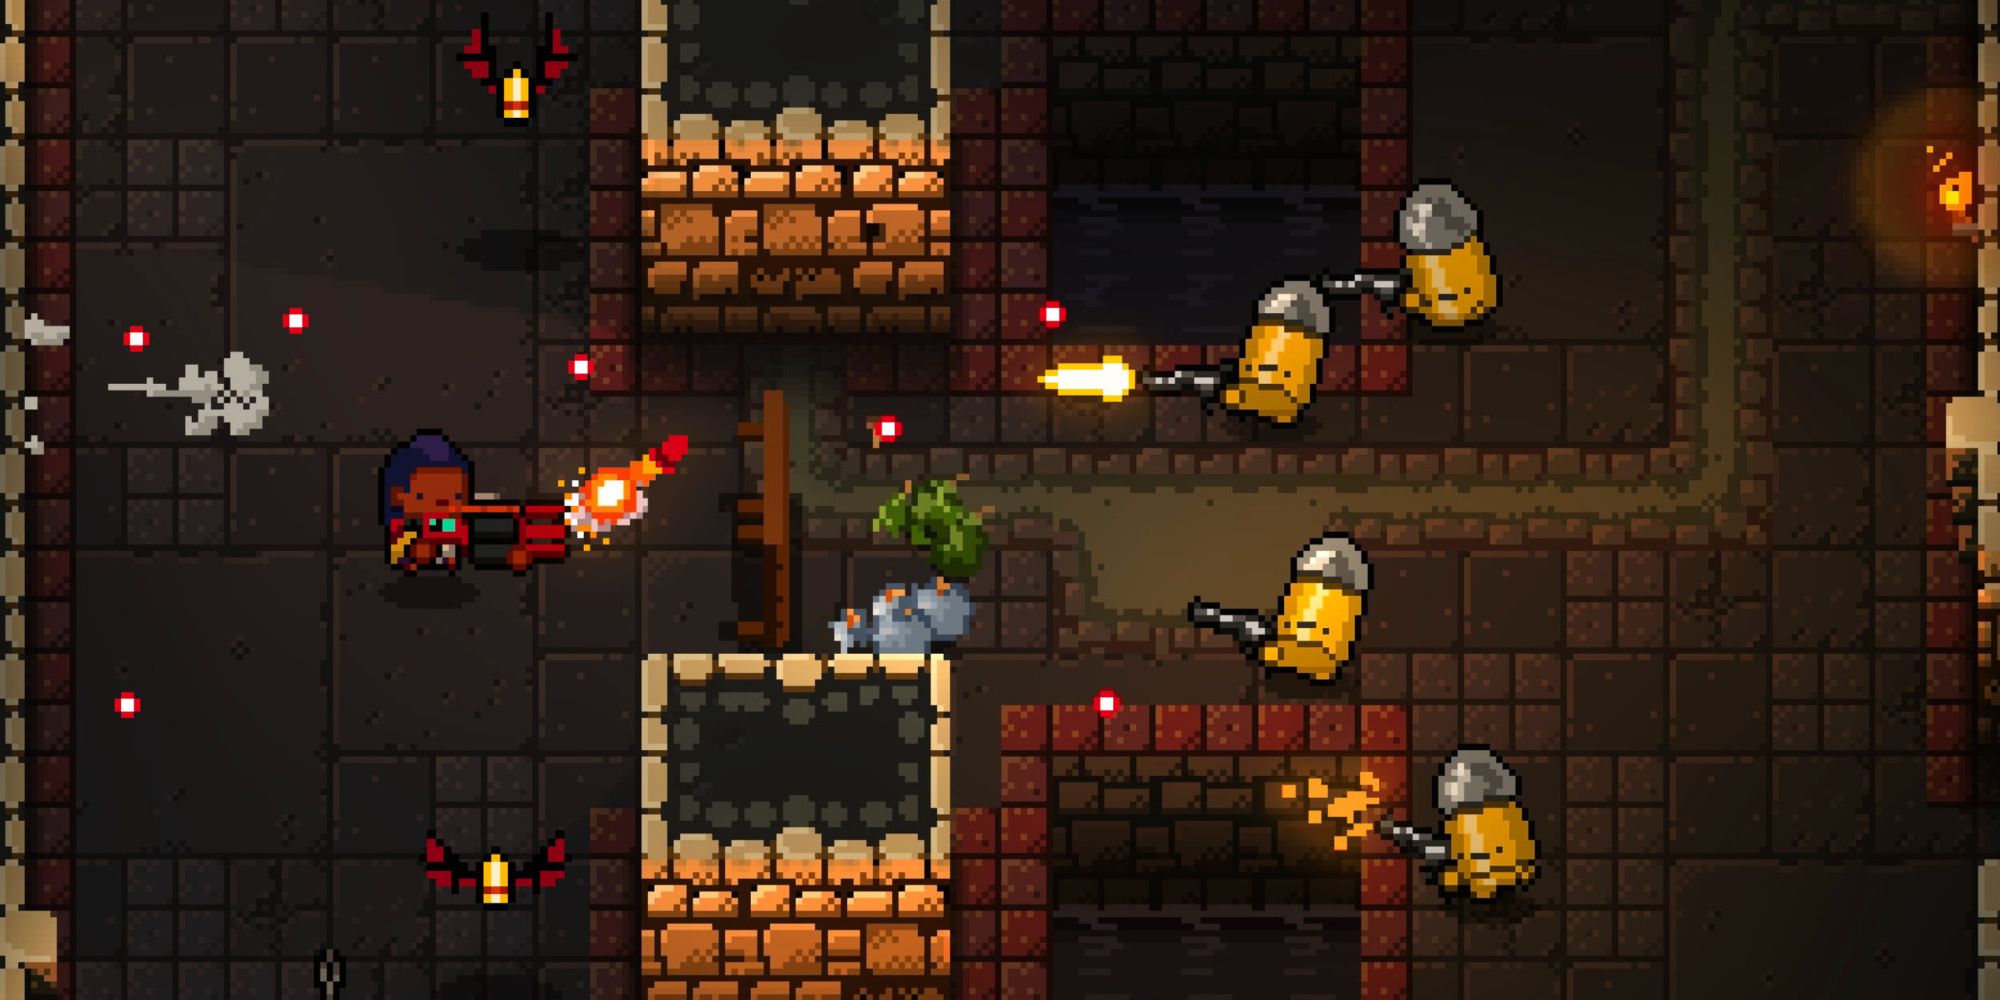 The hunter fights behind an overturned table and battles against bullet-kin enemies in Enter the Gungeon